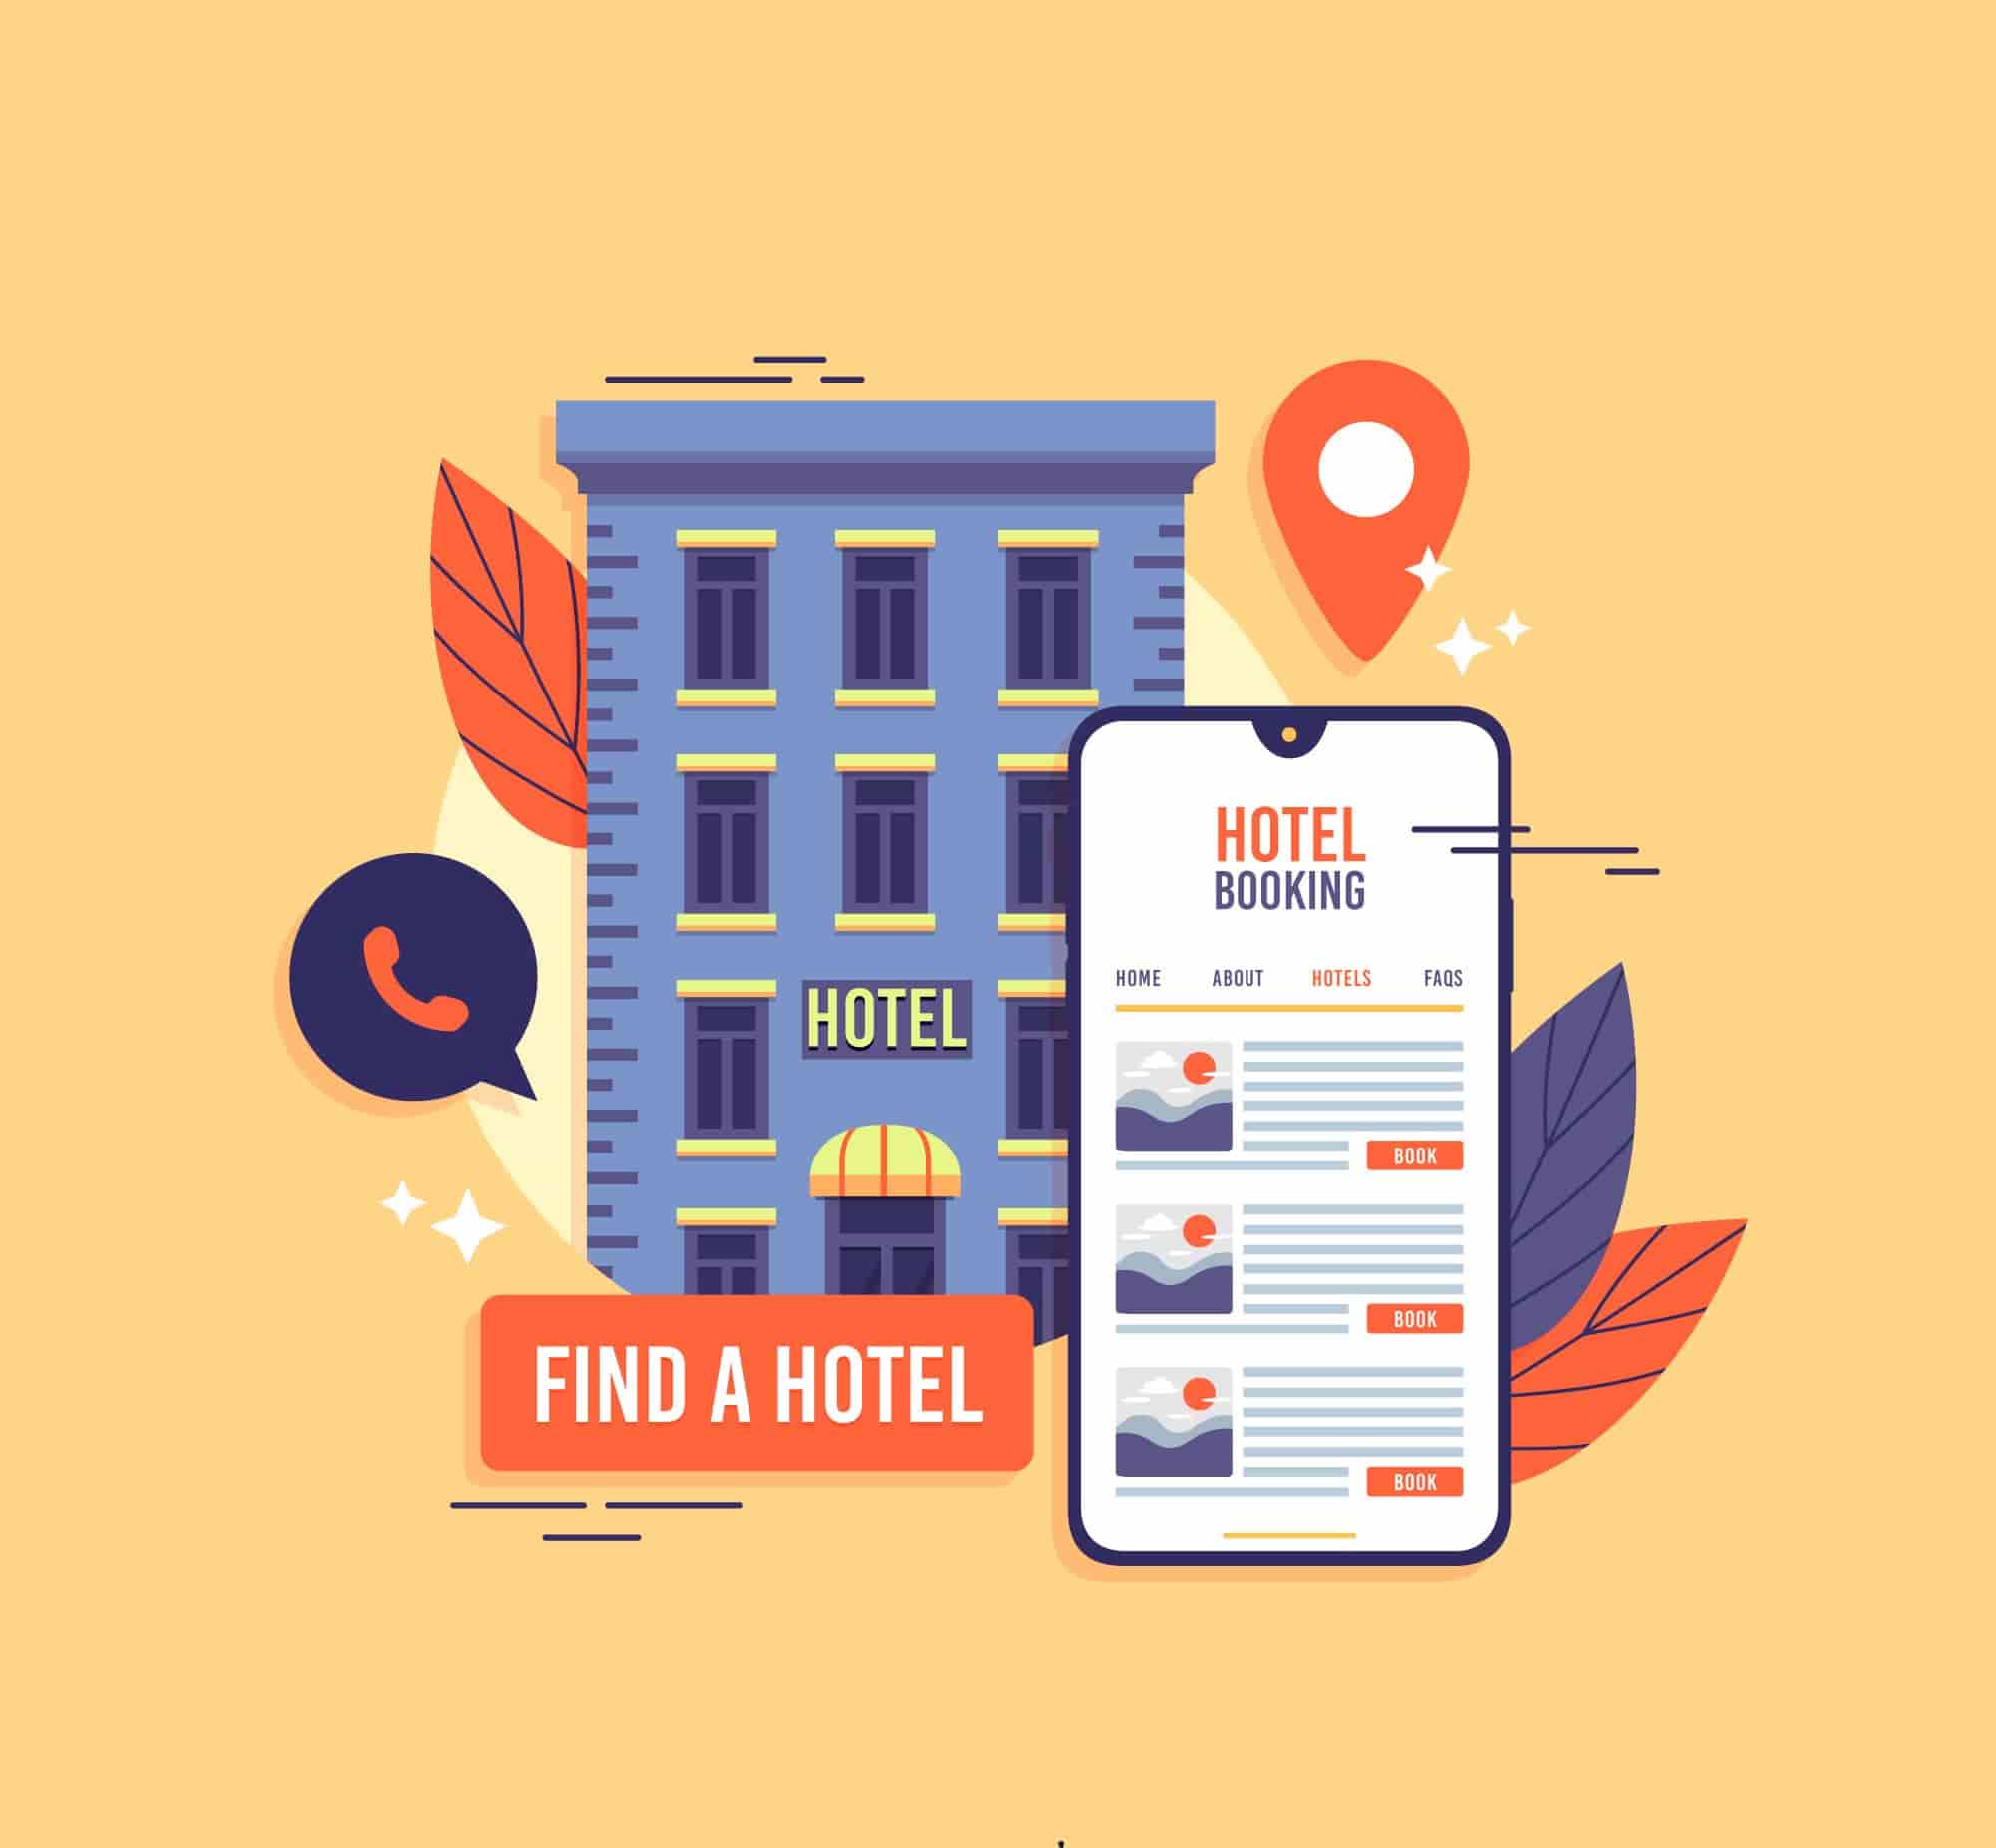 hotel booking made easier with the help of hotel management software